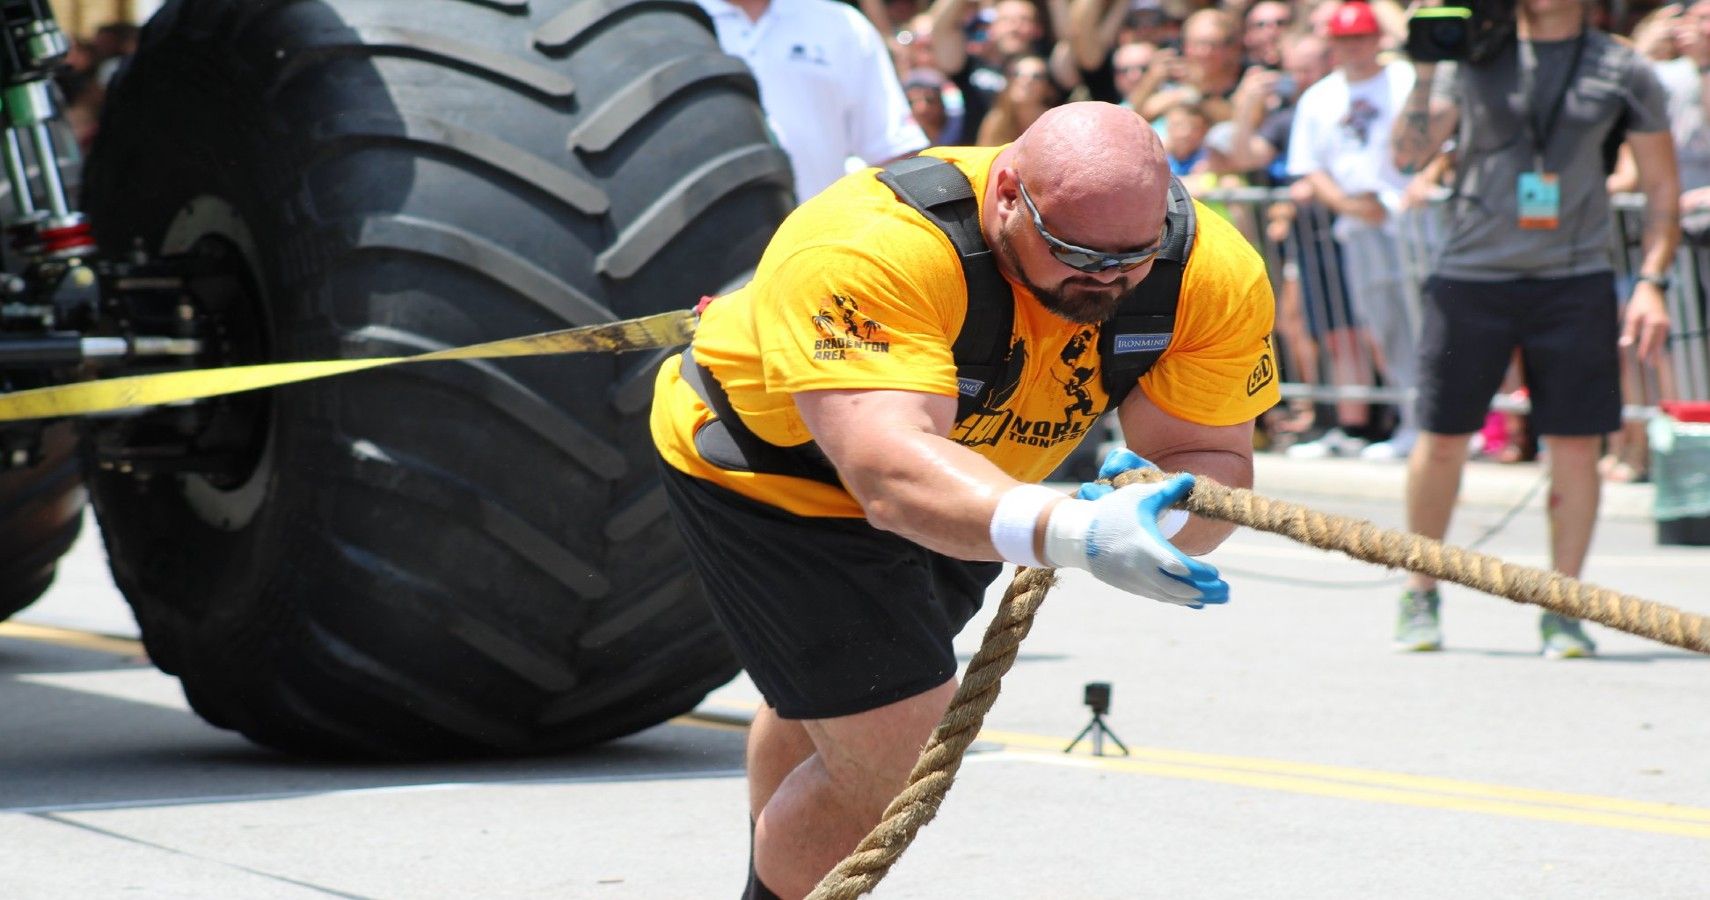 The Money & Power Of The World's Richest Strongman Champion